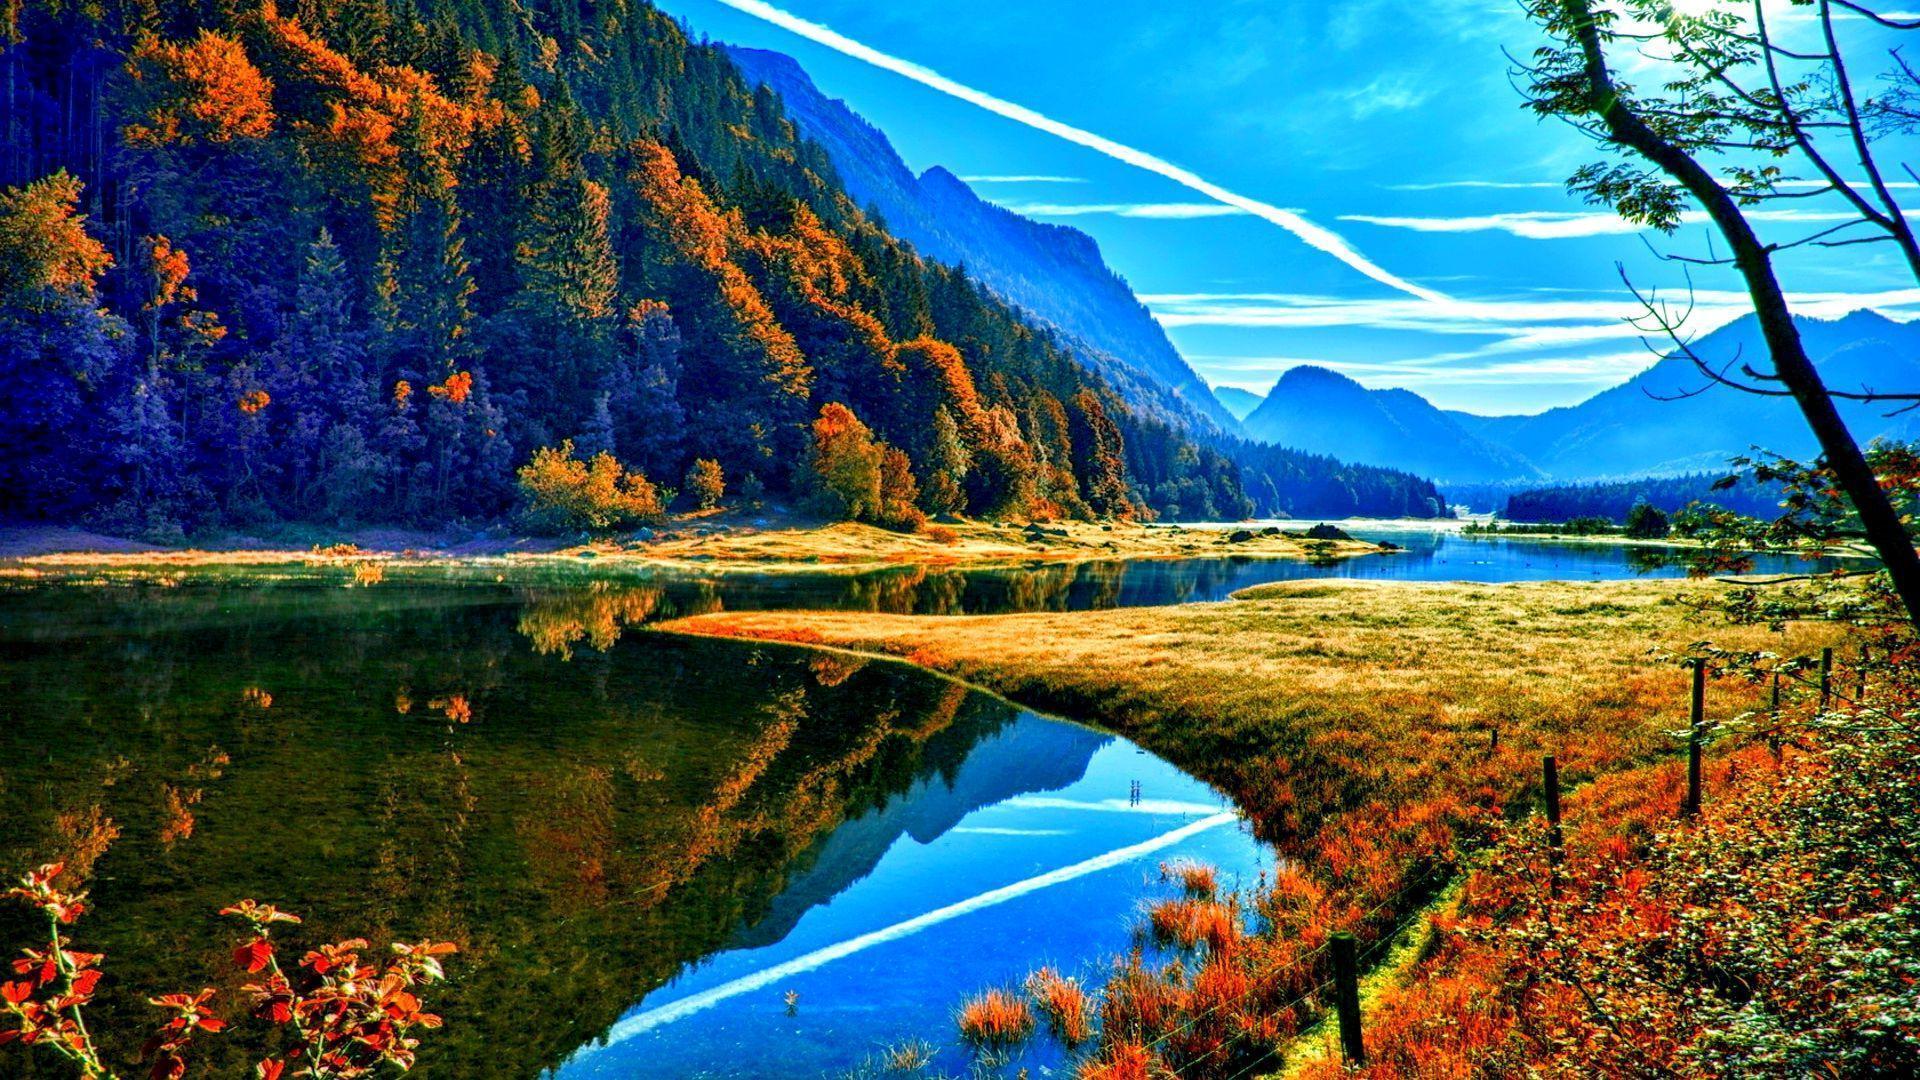 River in the mountains wallpapers